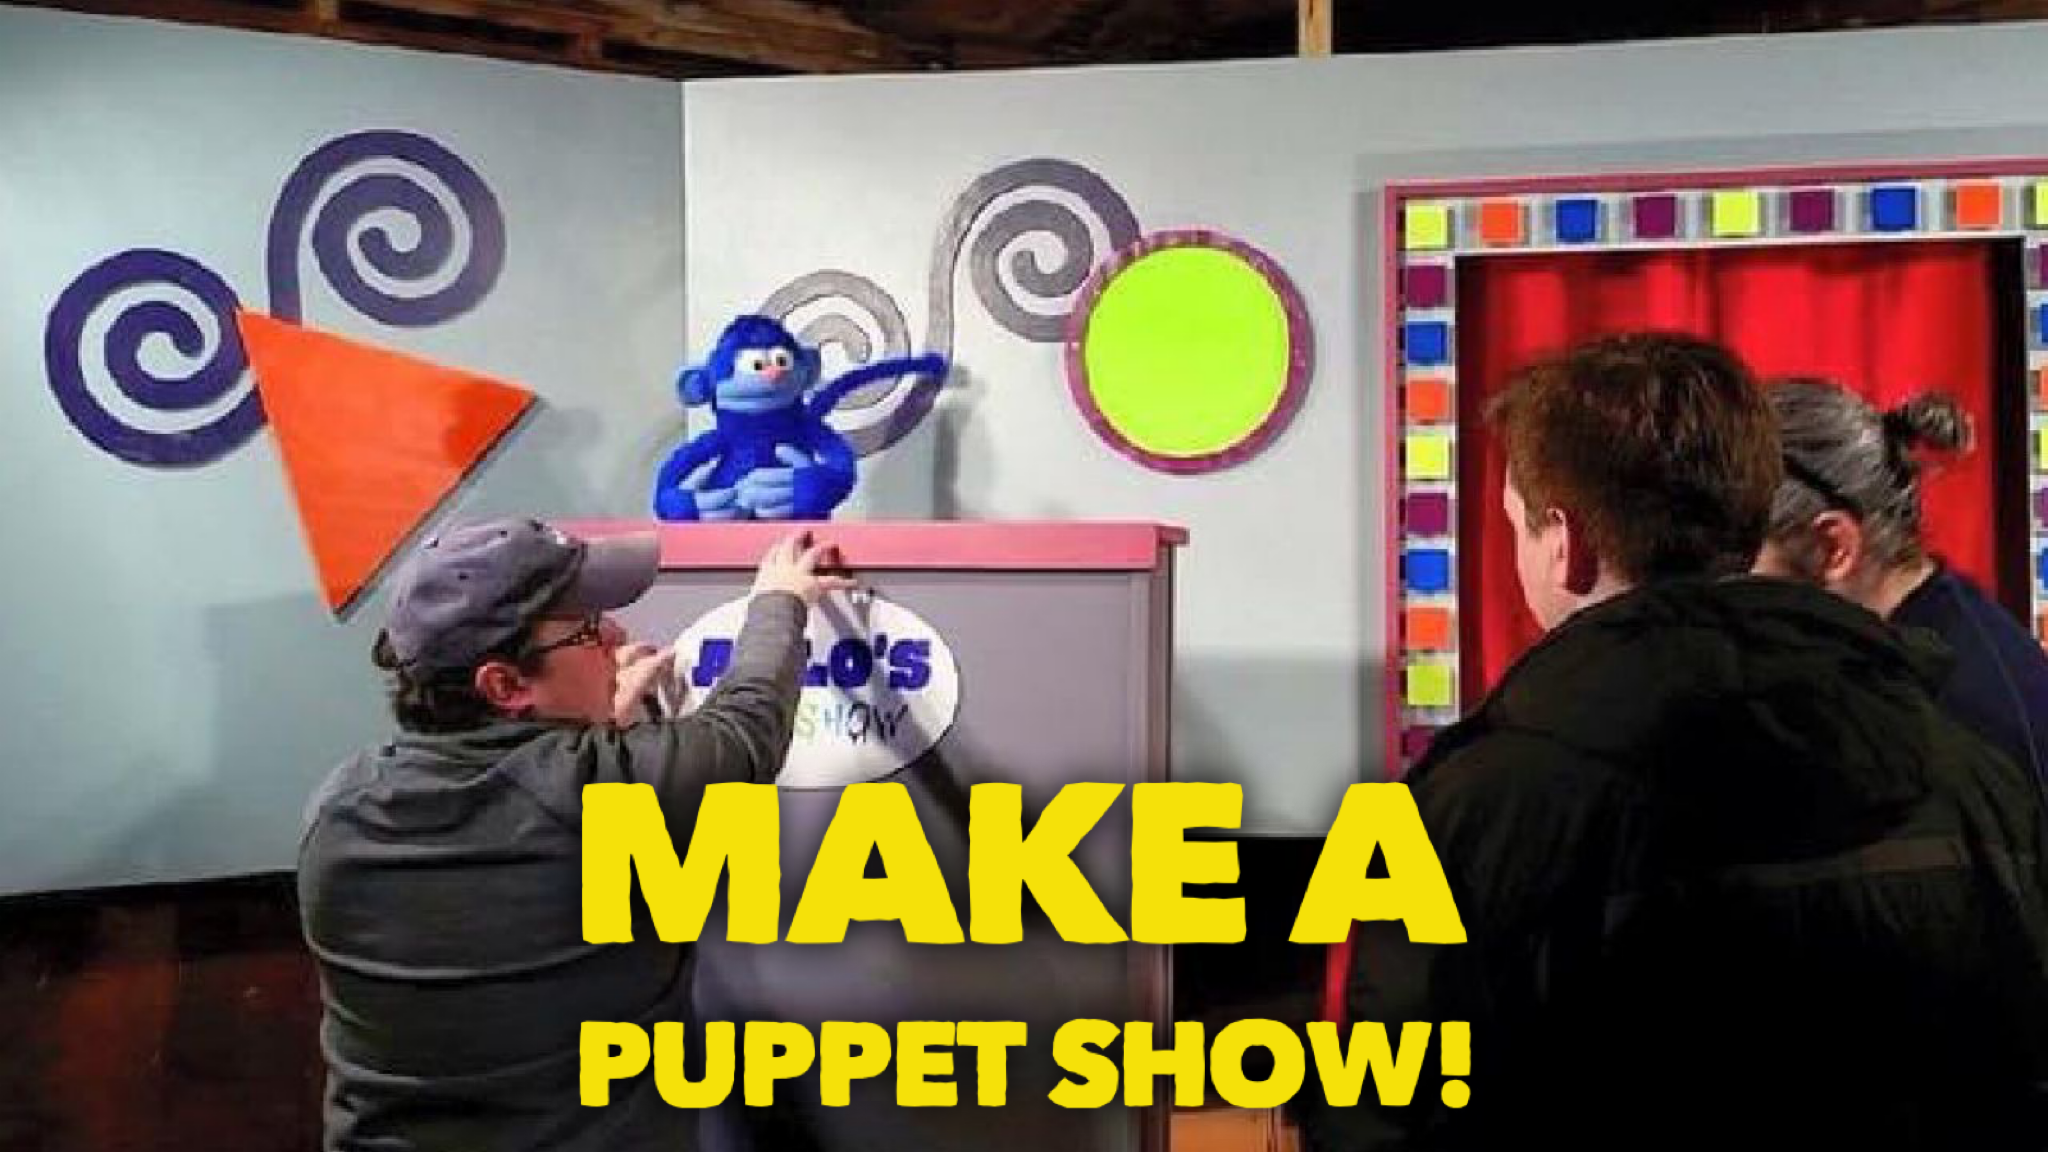 19 puppet stand ideas  puppet theater, puppets, puppet stage